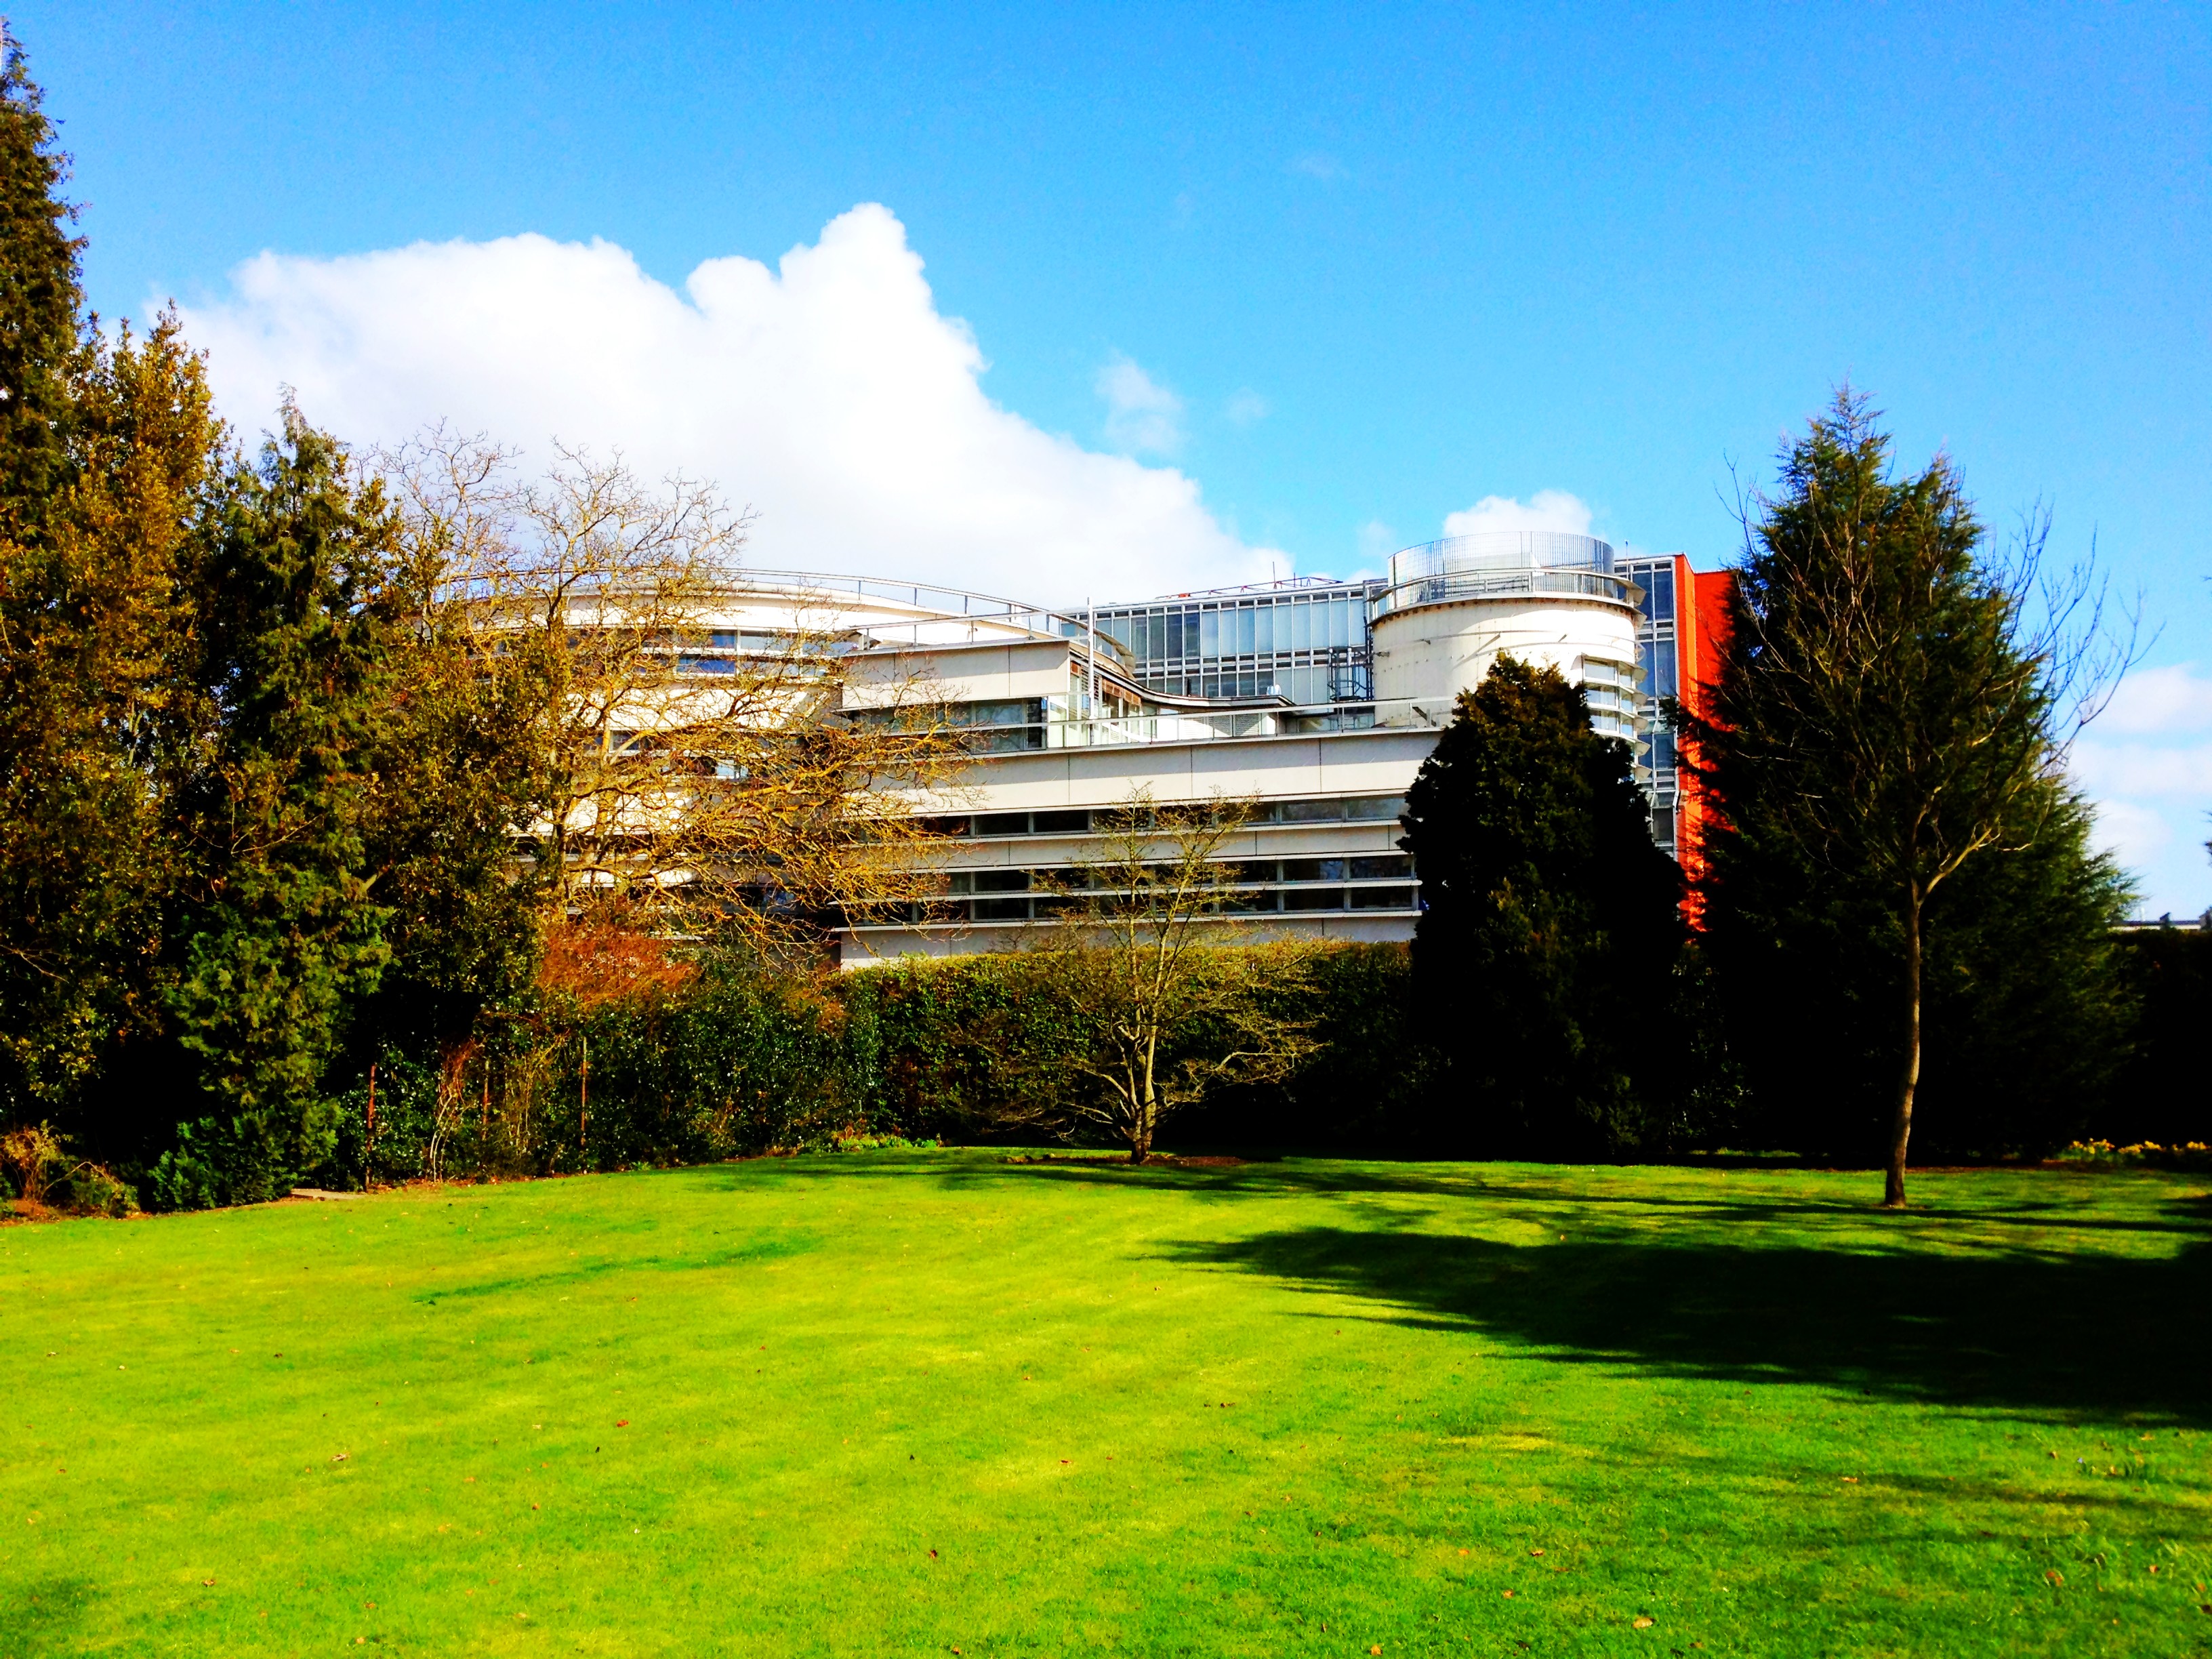 Faculty of Divinity © University of Cambridge. All rights reserved